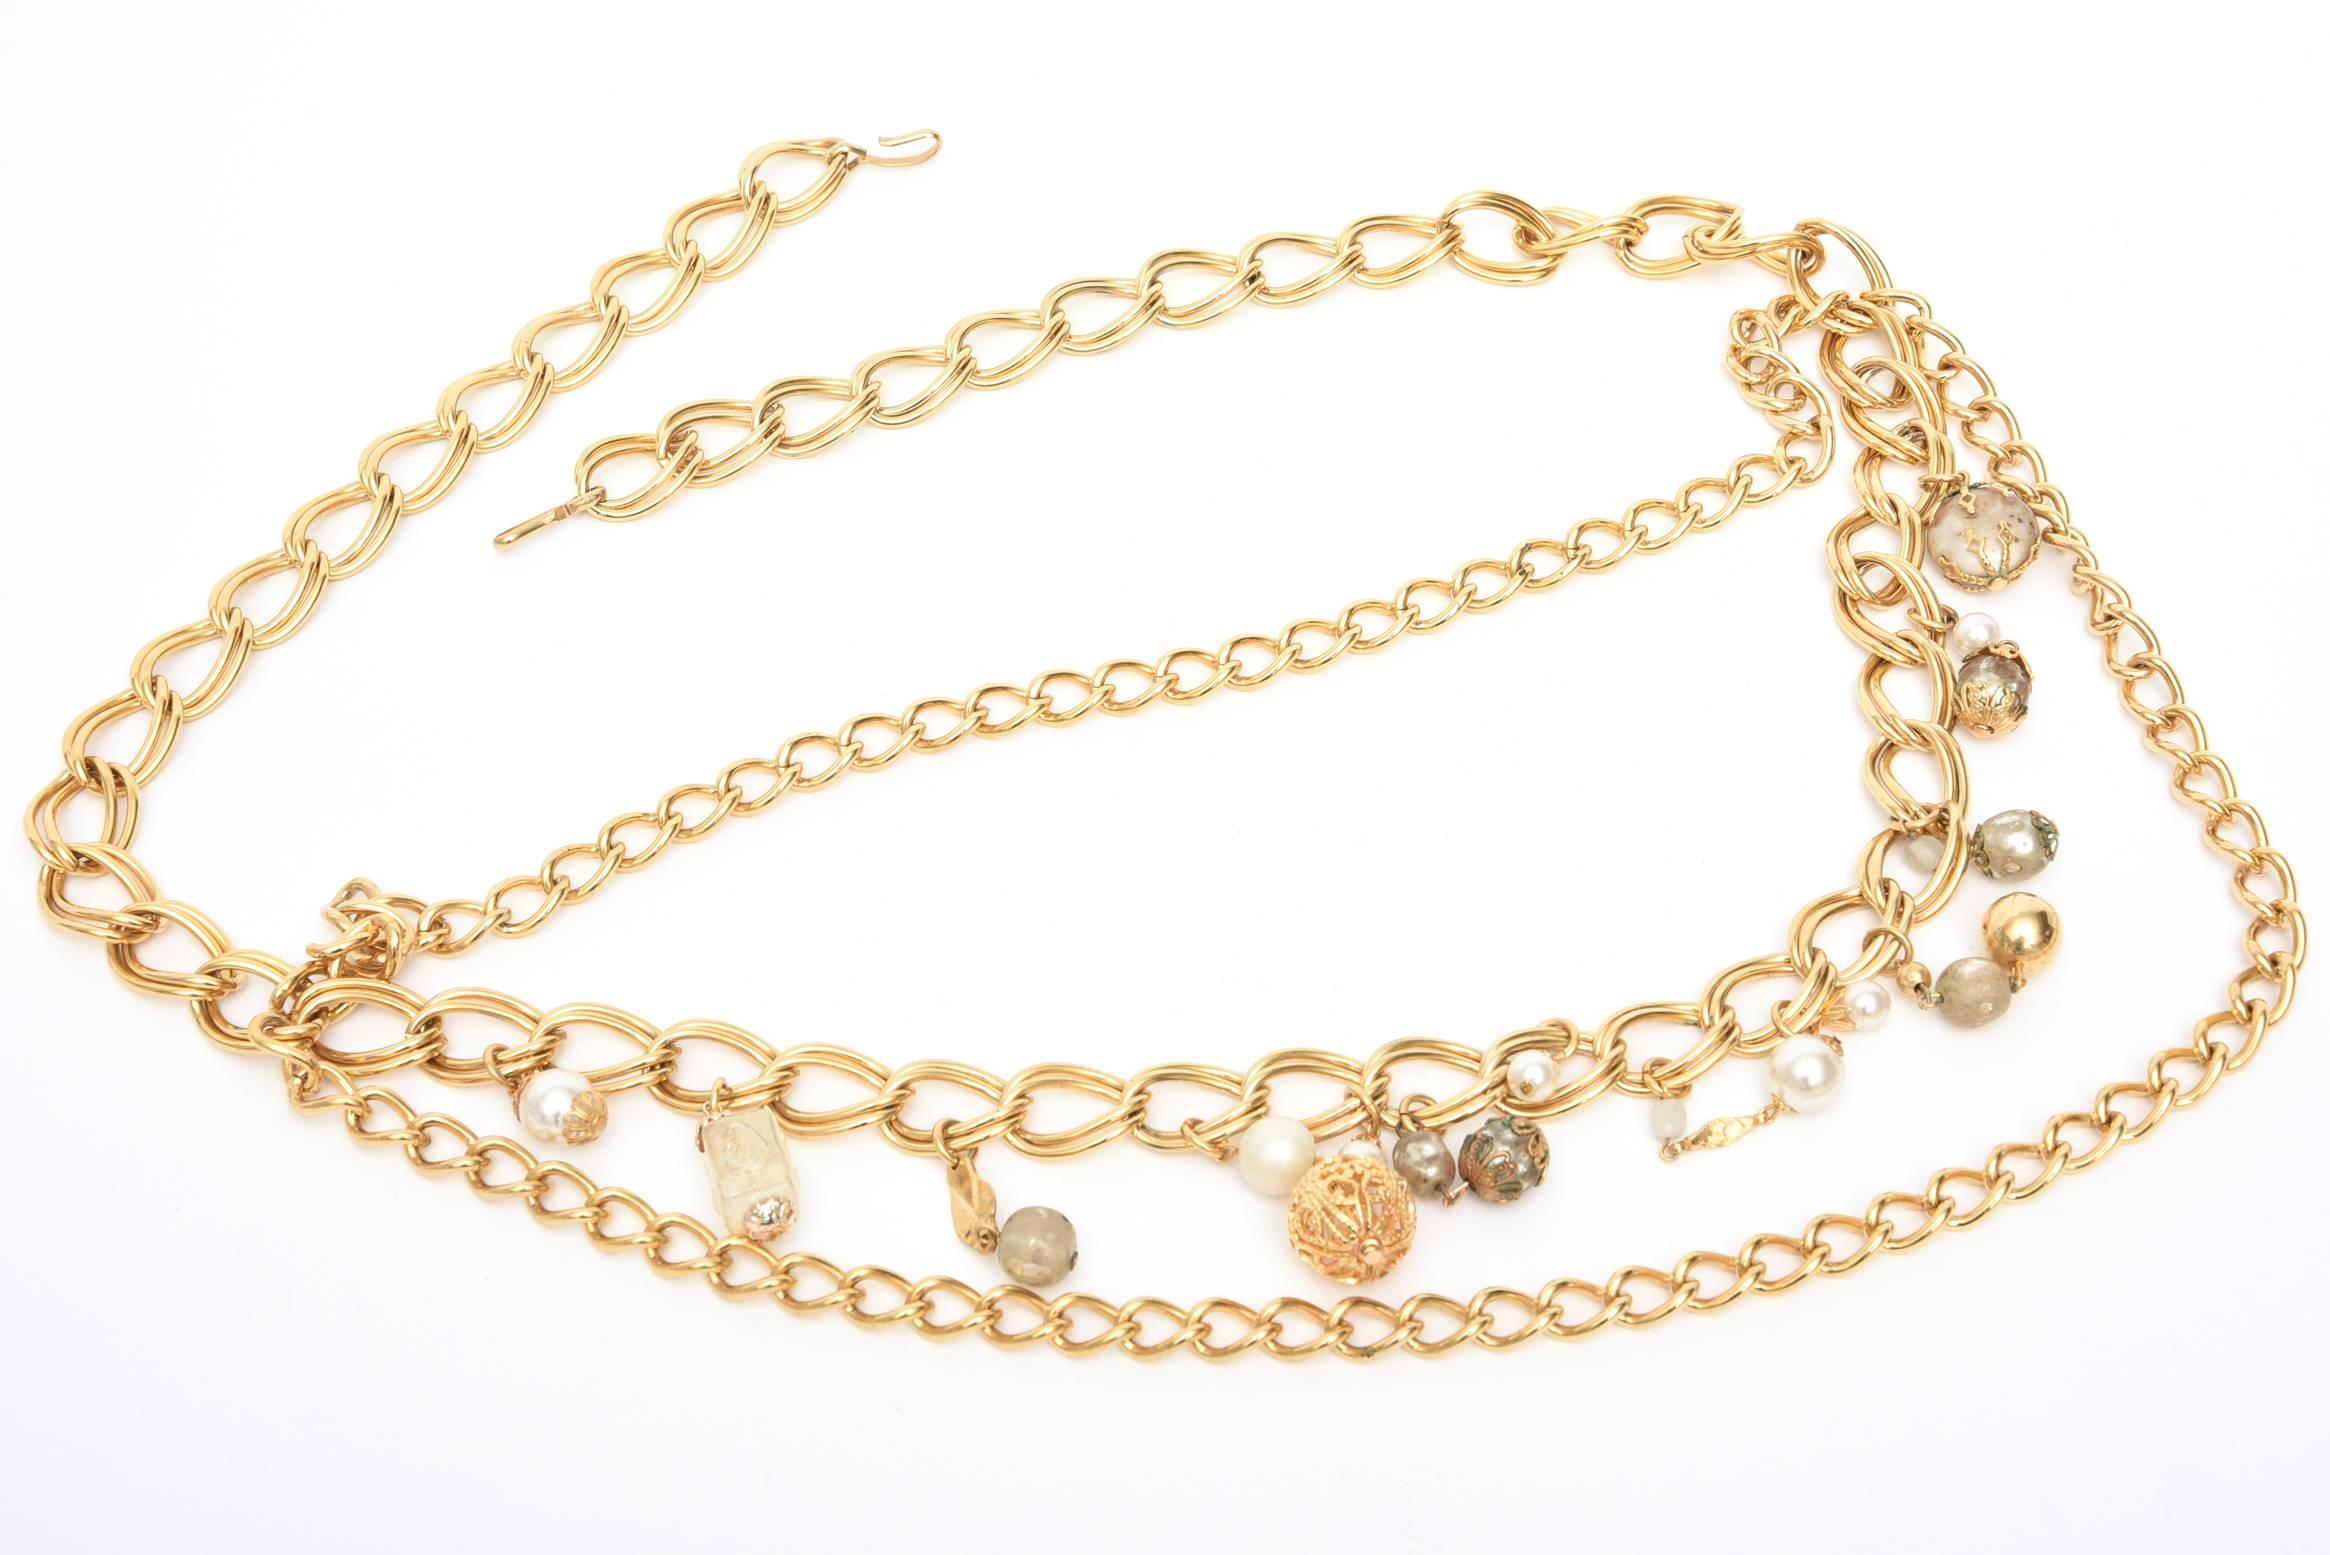 This vintage gold plated fabulous and chic chain link belt with faux pearls and small pendants dangles with a v form of chains of a 4 inch drop with the pendants hanging in the middle. The chain links are 2 different sizes. It is from the 70's.